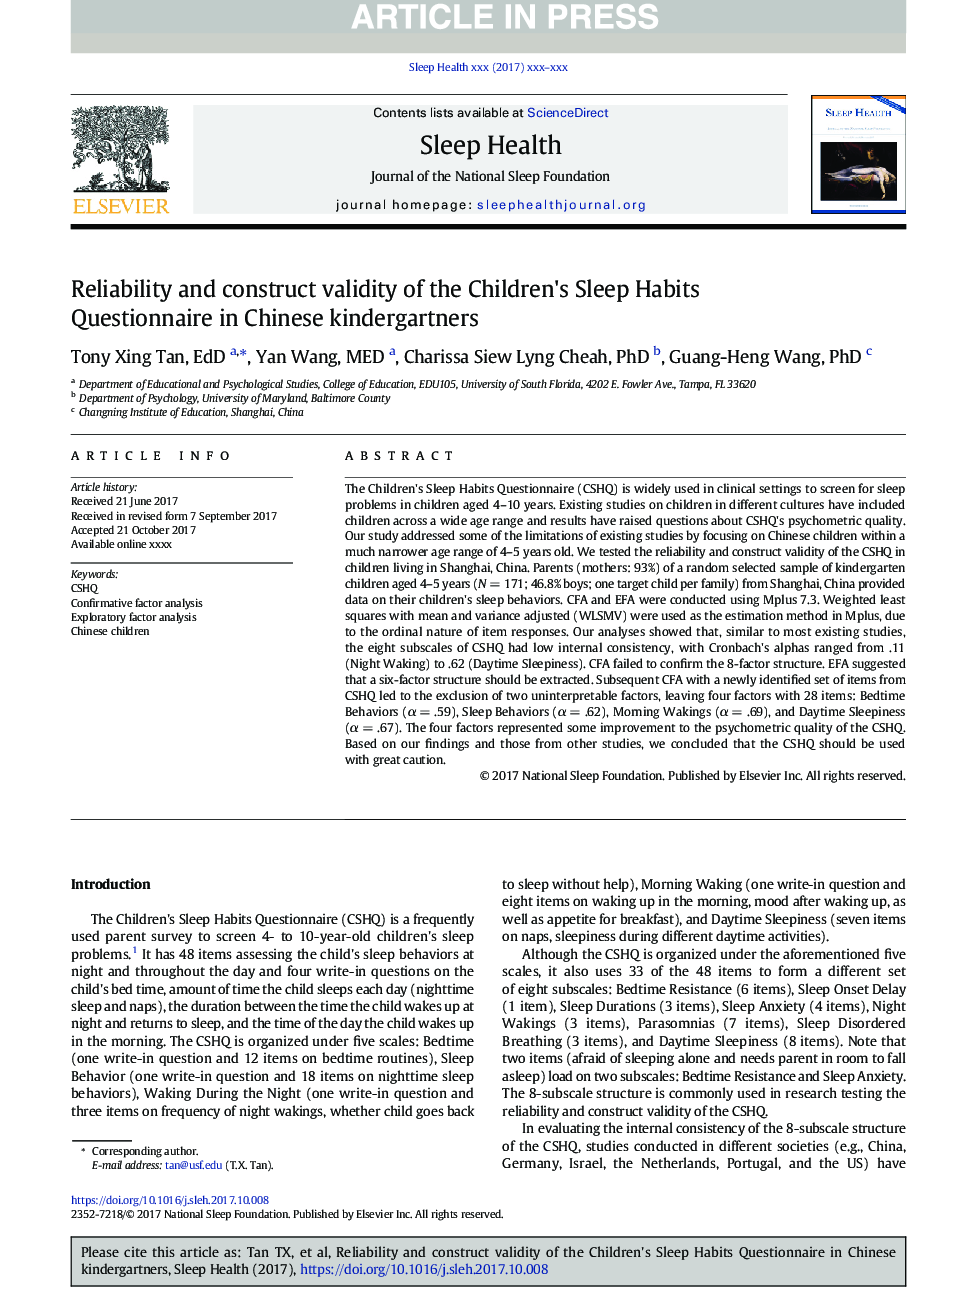 Reliability and construct validity of the Children's Sleep Habits Questionnaire in Chinese kindergartners